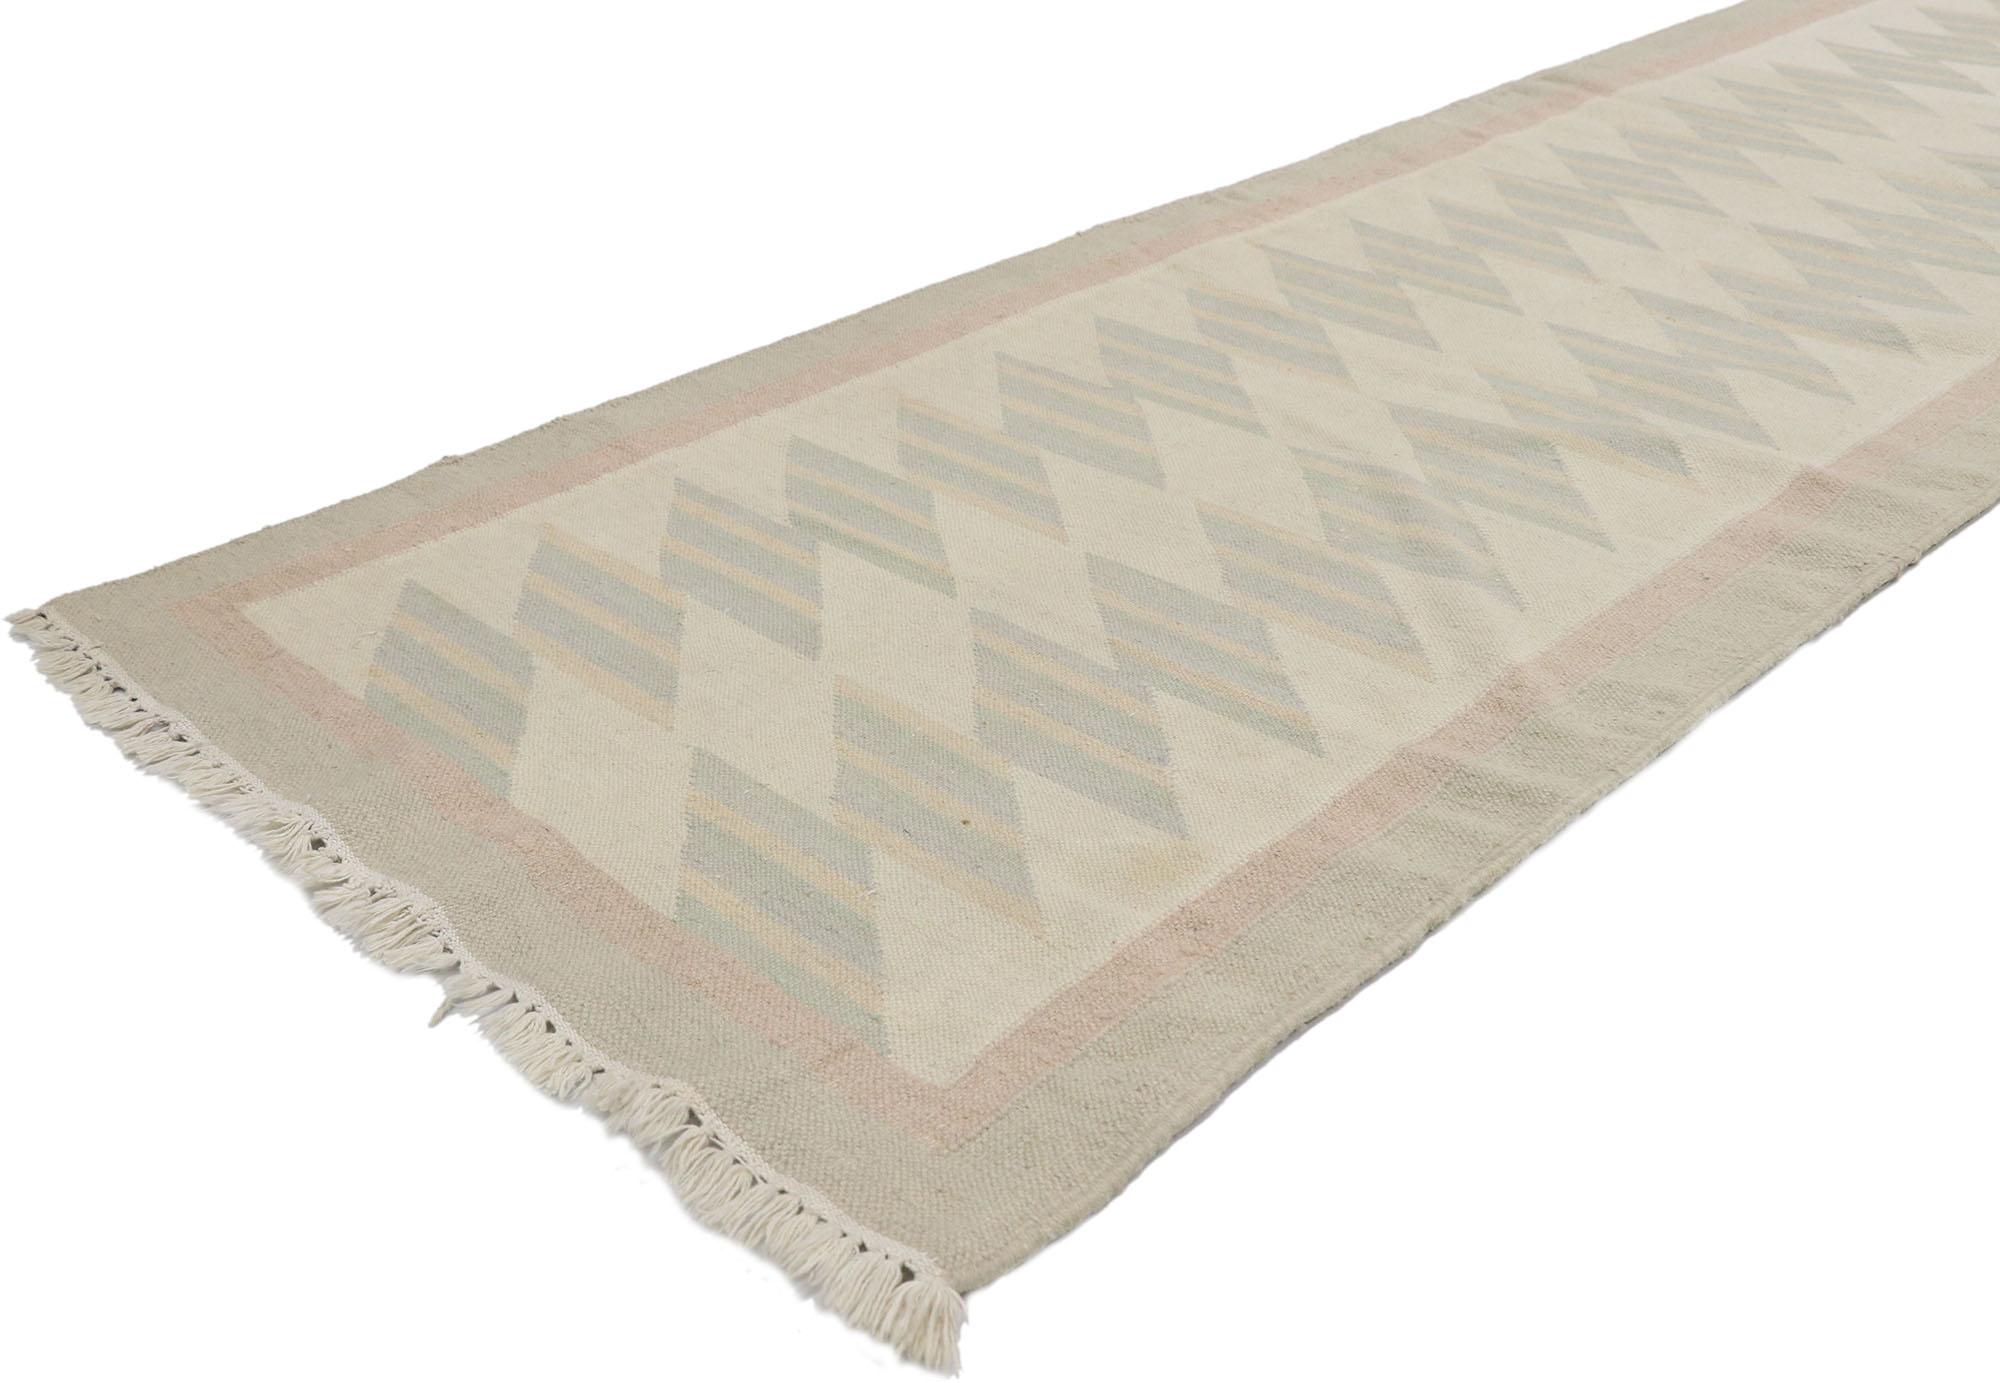 78055, vintage Persian Shiraz Kilim Runner with Southwestern Bohemian style. Full of tiny details and effortless beauty combined with subdued colors and tribal style, this hand-woven wool vintage Persian Shiraz kilim runner is a captivating vision